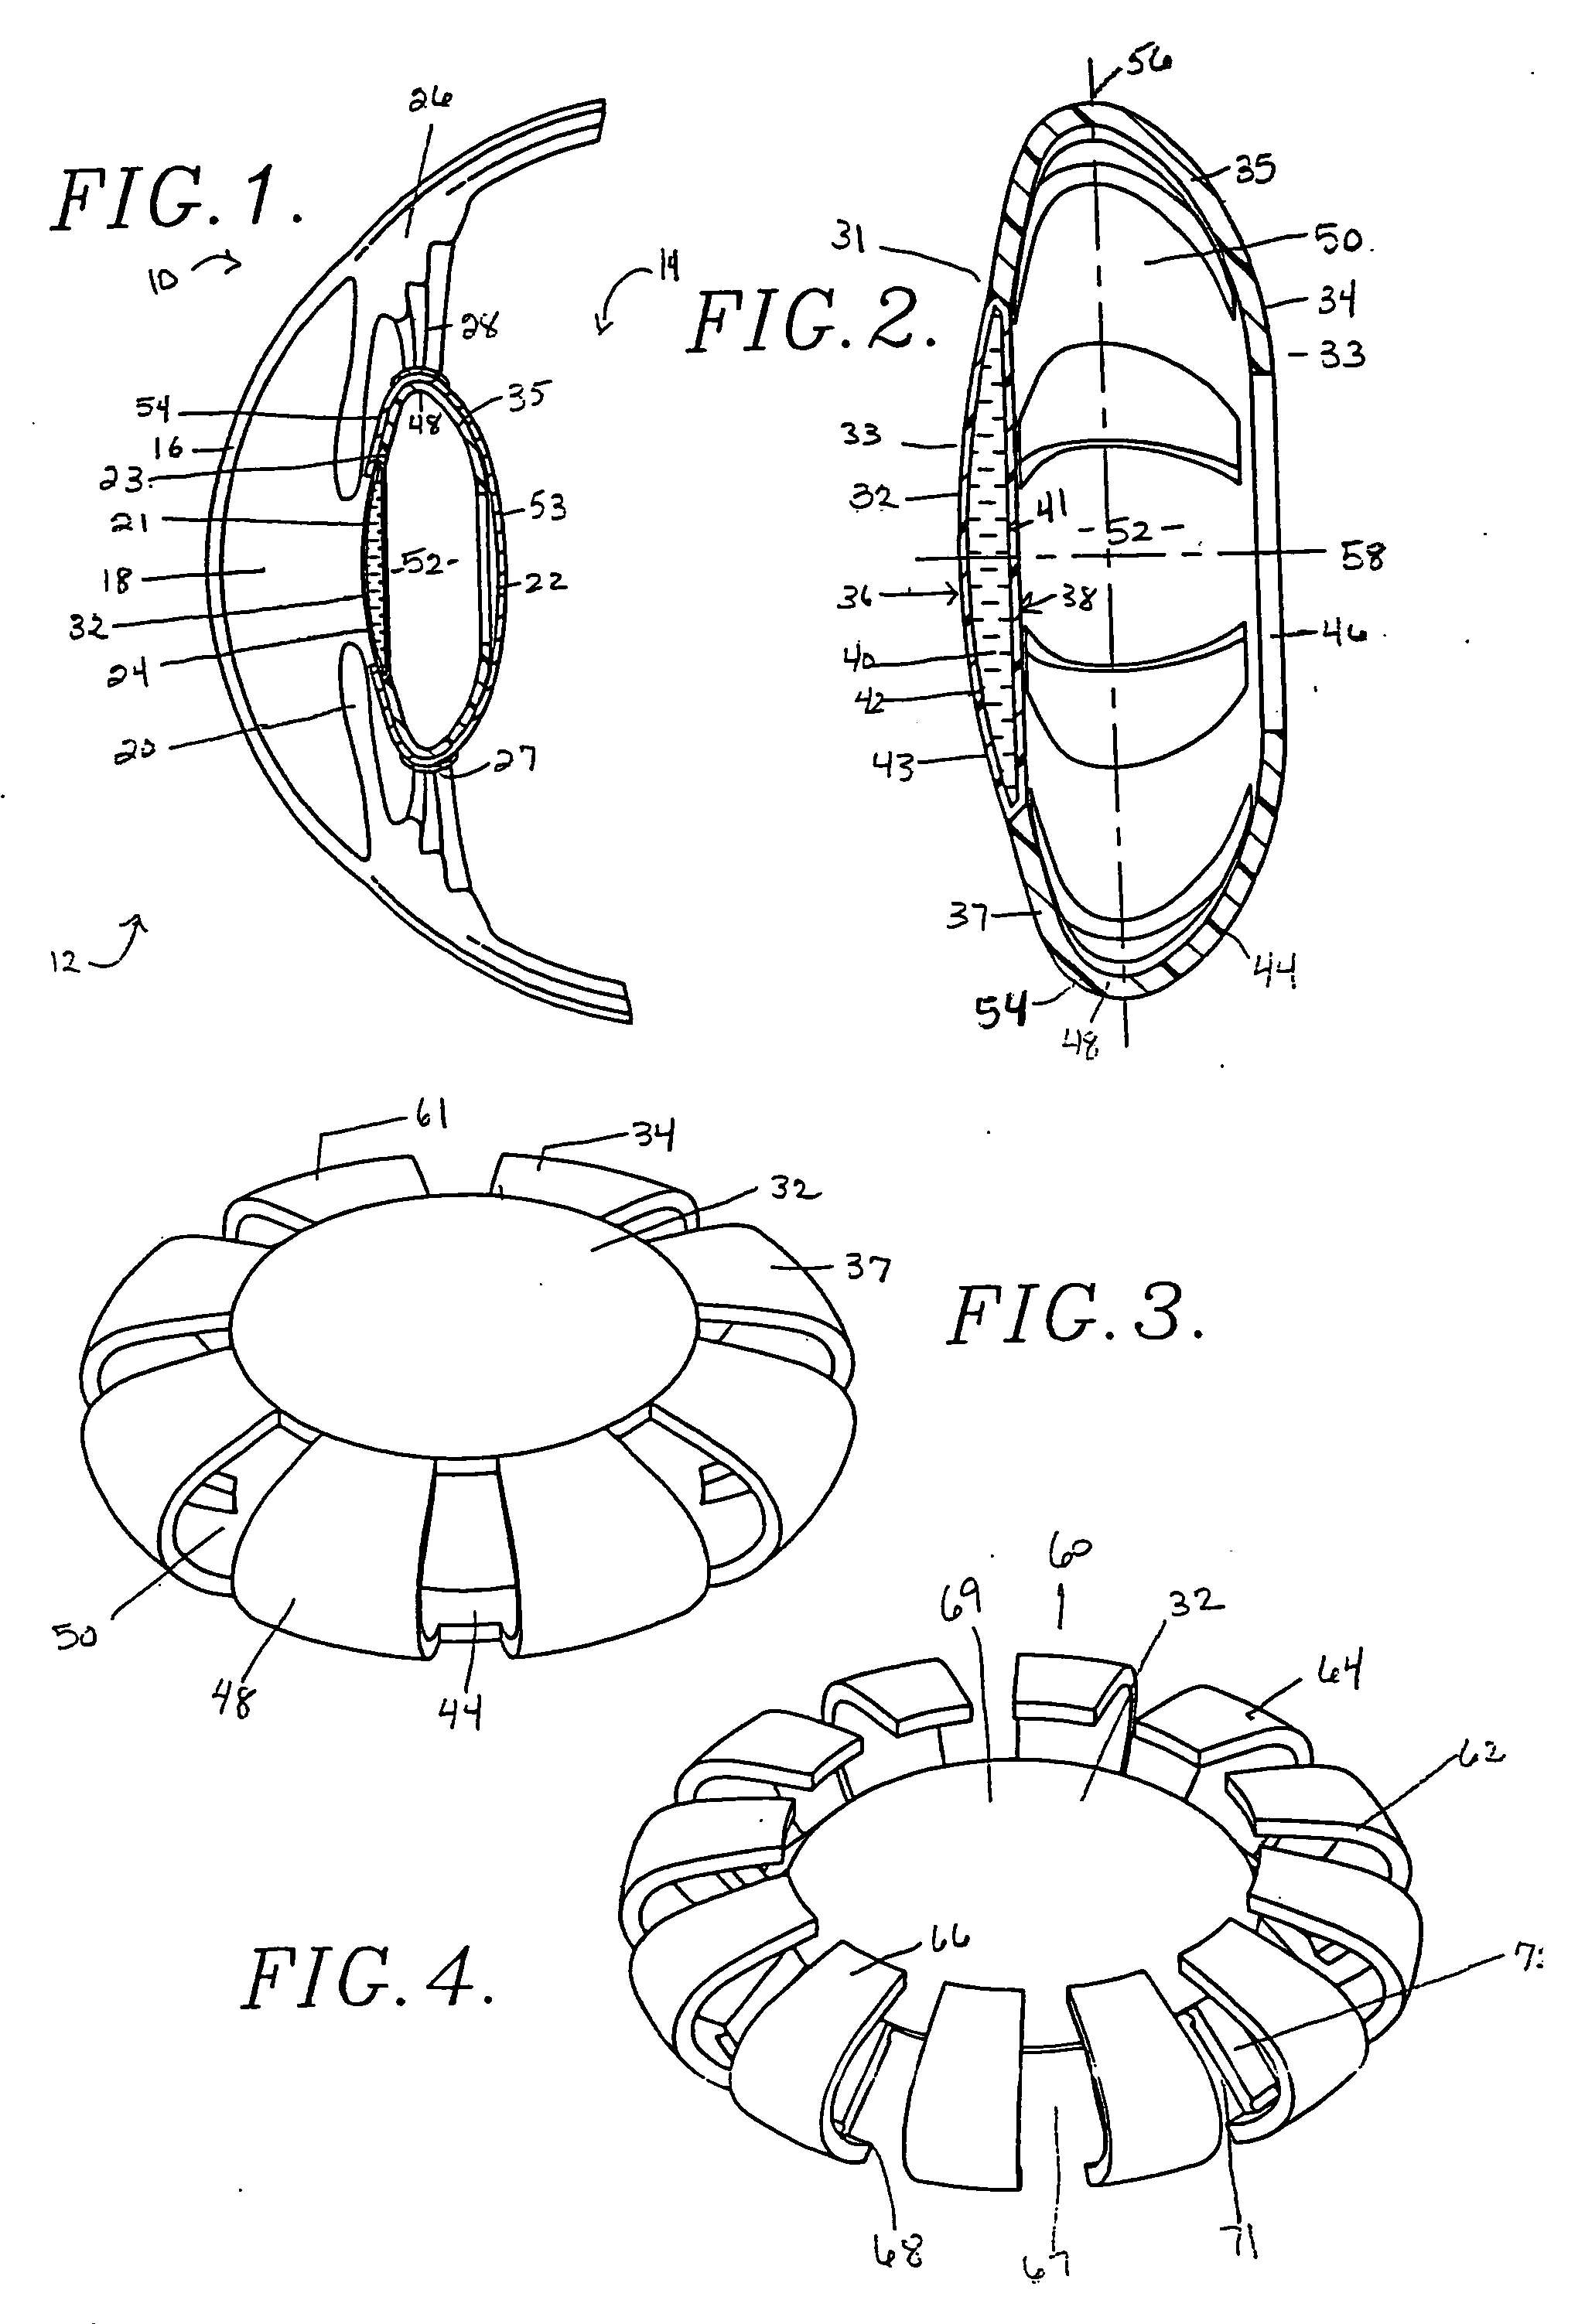 Capsular intraocular lens implant having a refractive liquid therein